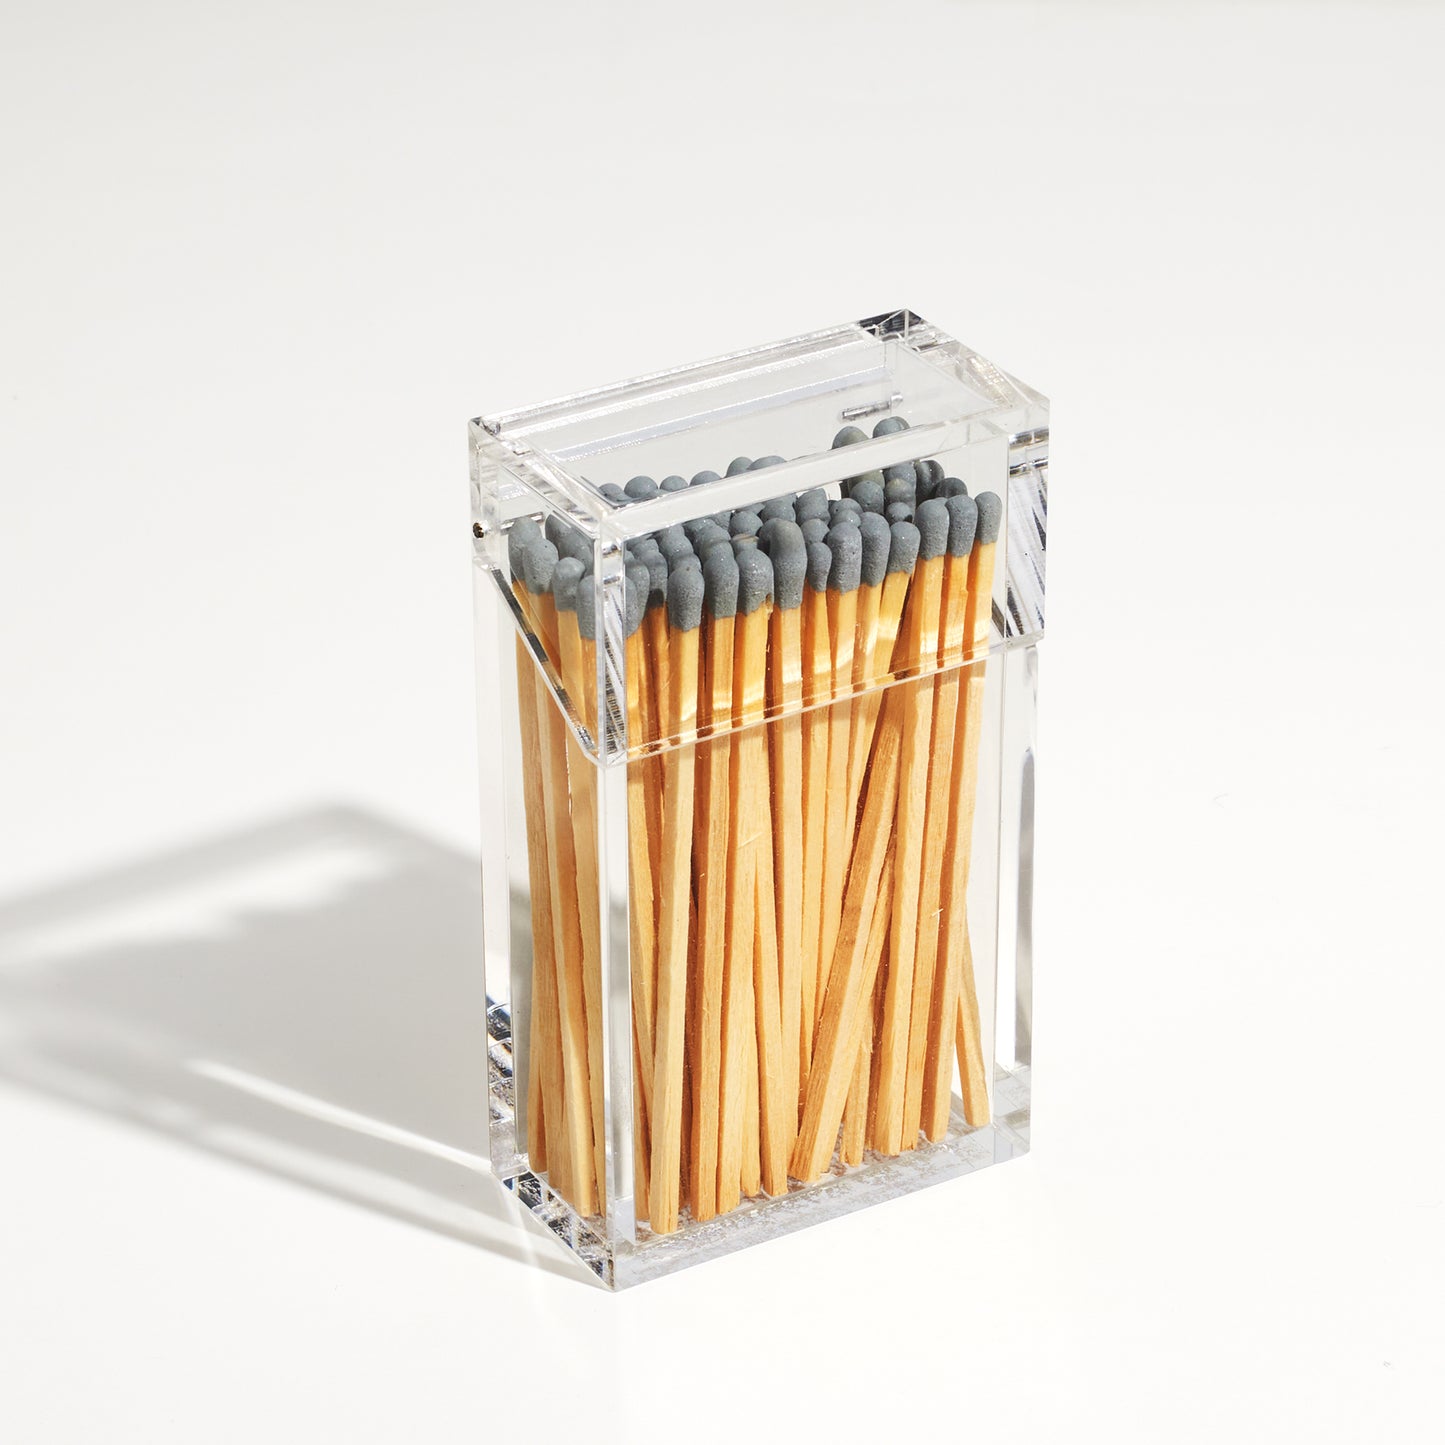 Closed Match holder shaped like a Cigarette style acrylic case with Gray matches in it.